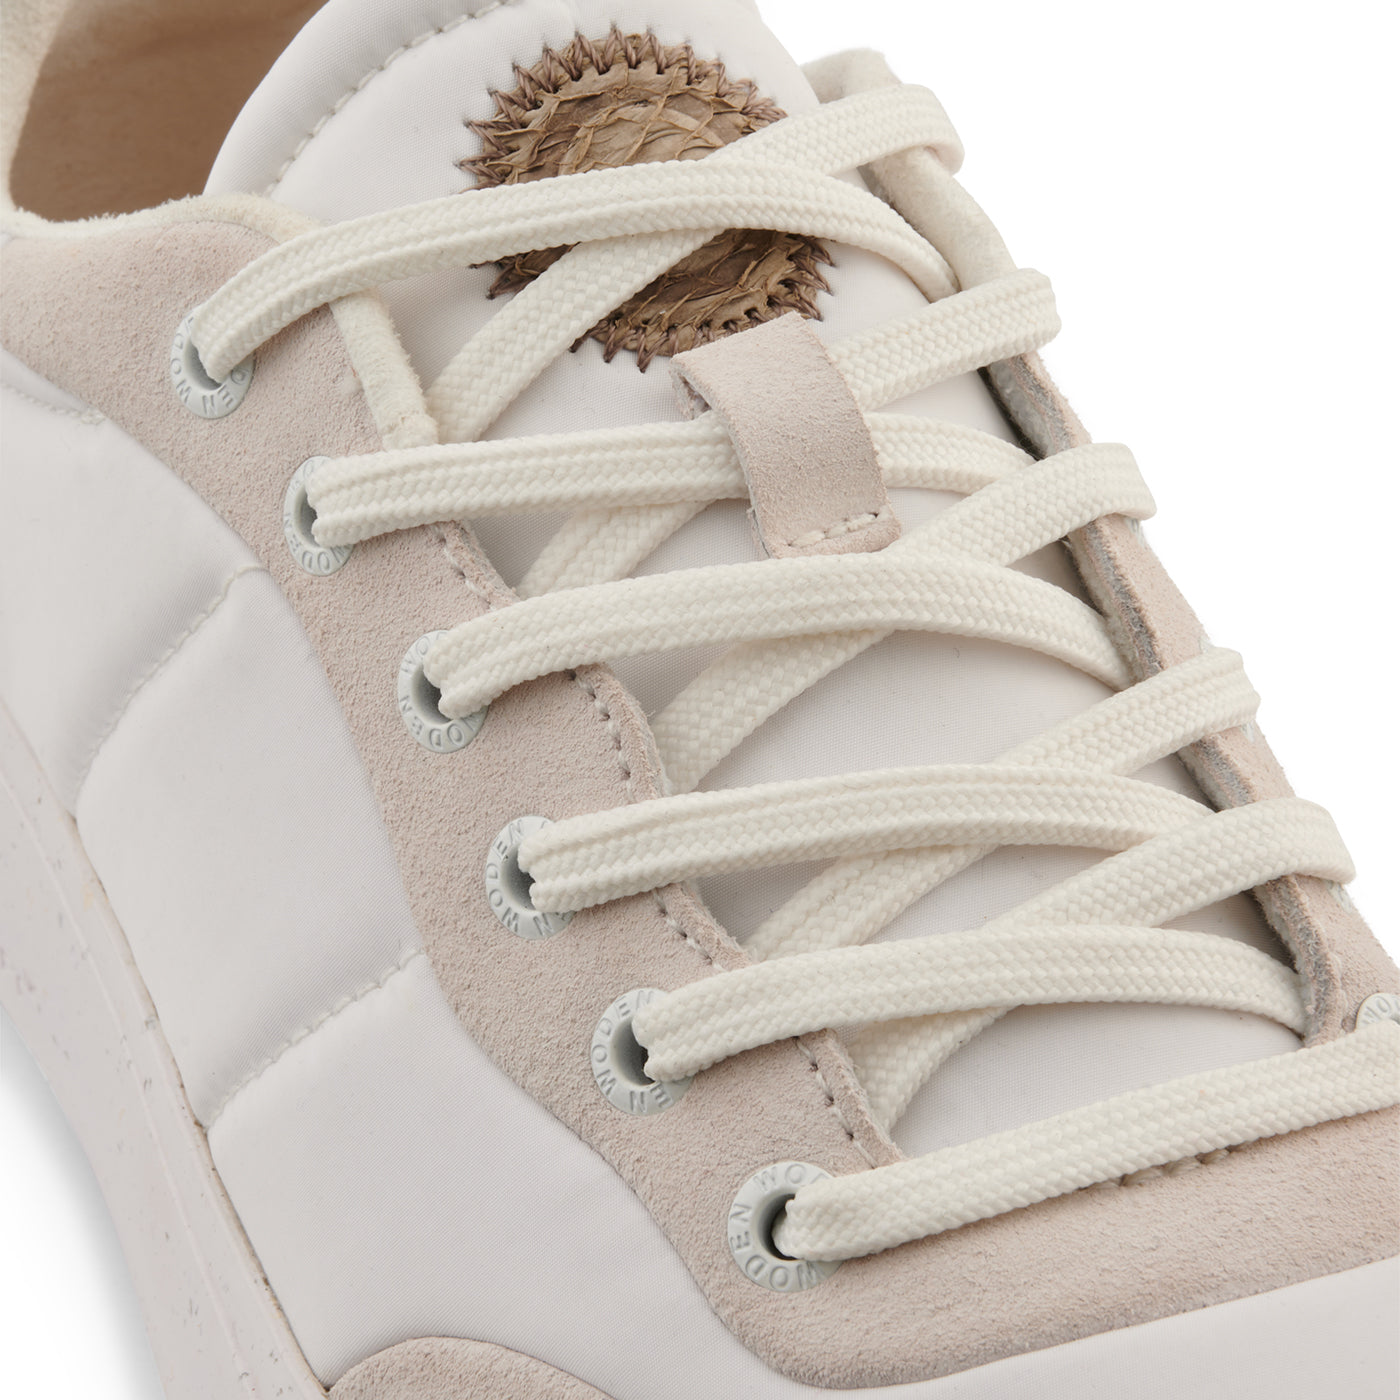 WODEN May Sneakers 300 Bright White